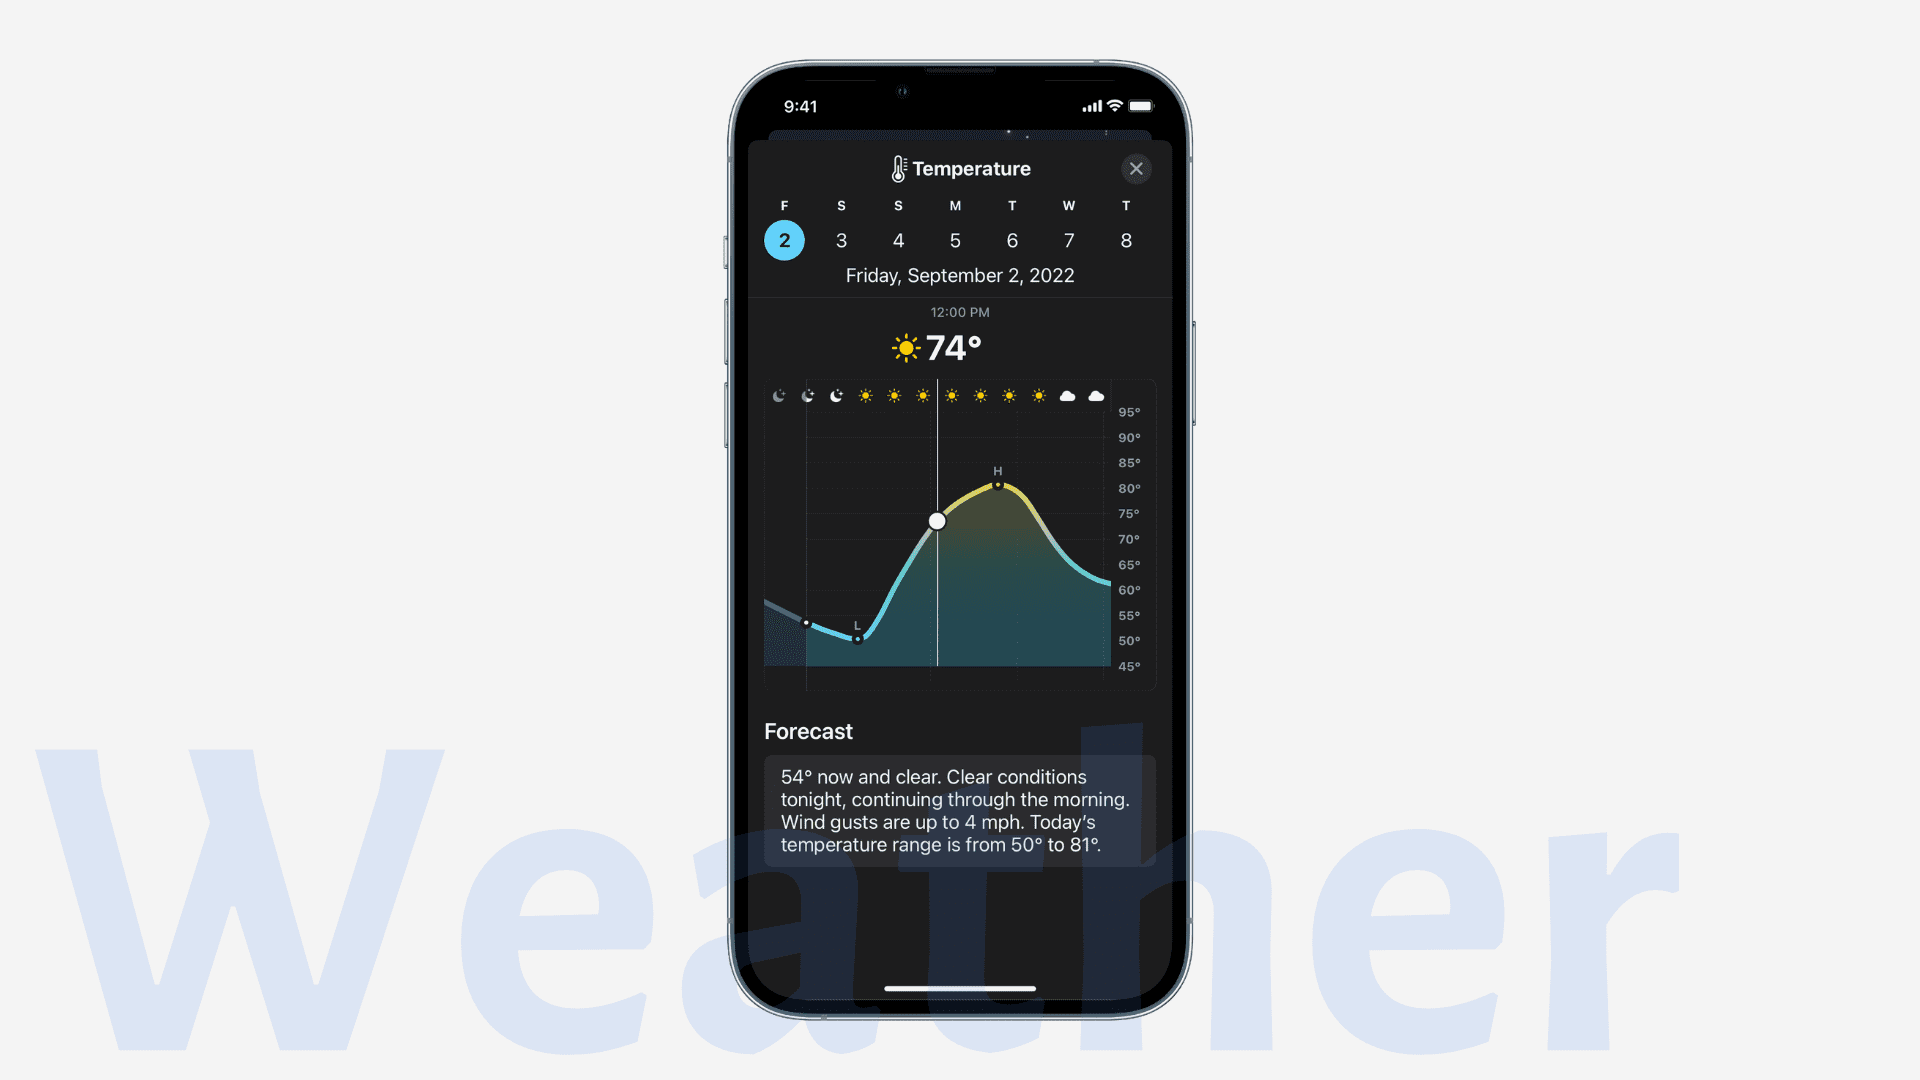 iOS 16 Weather features